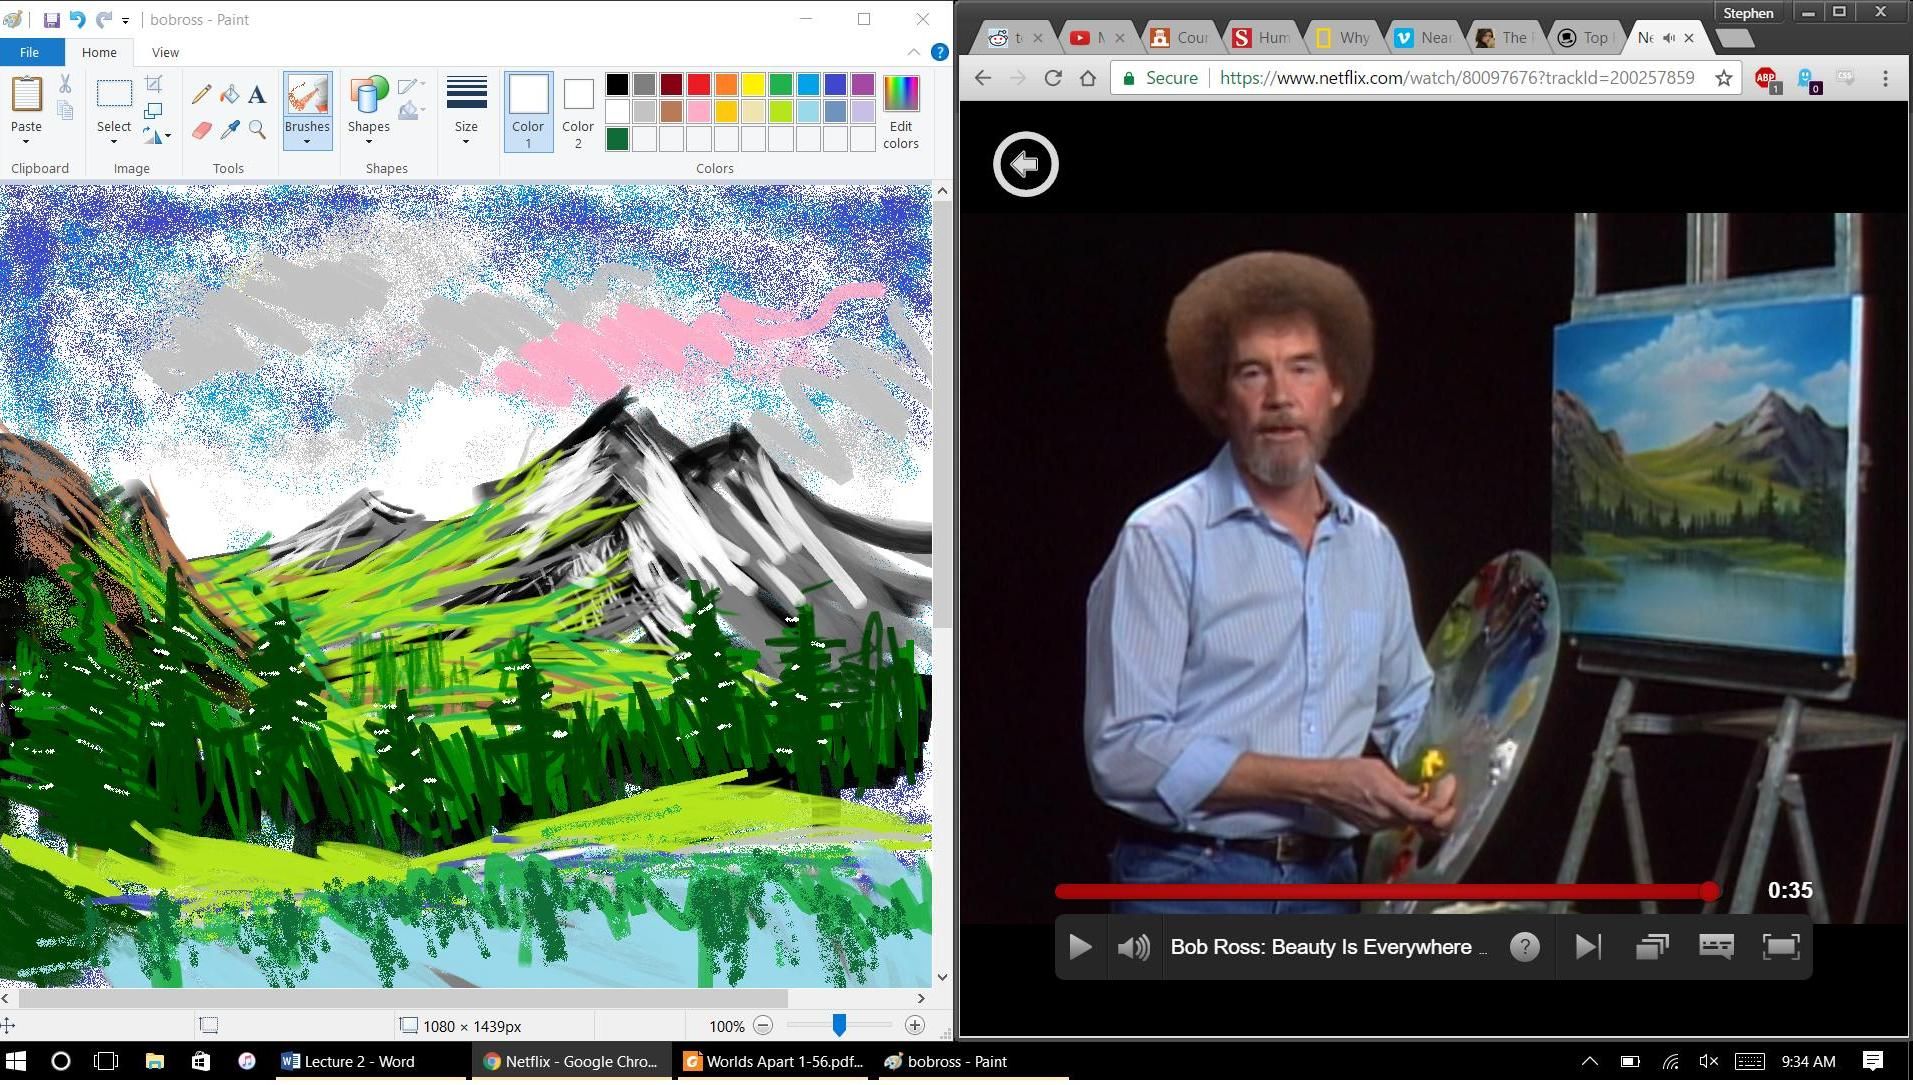 I was bored during class and painted along with Bob Ross using MS paint.